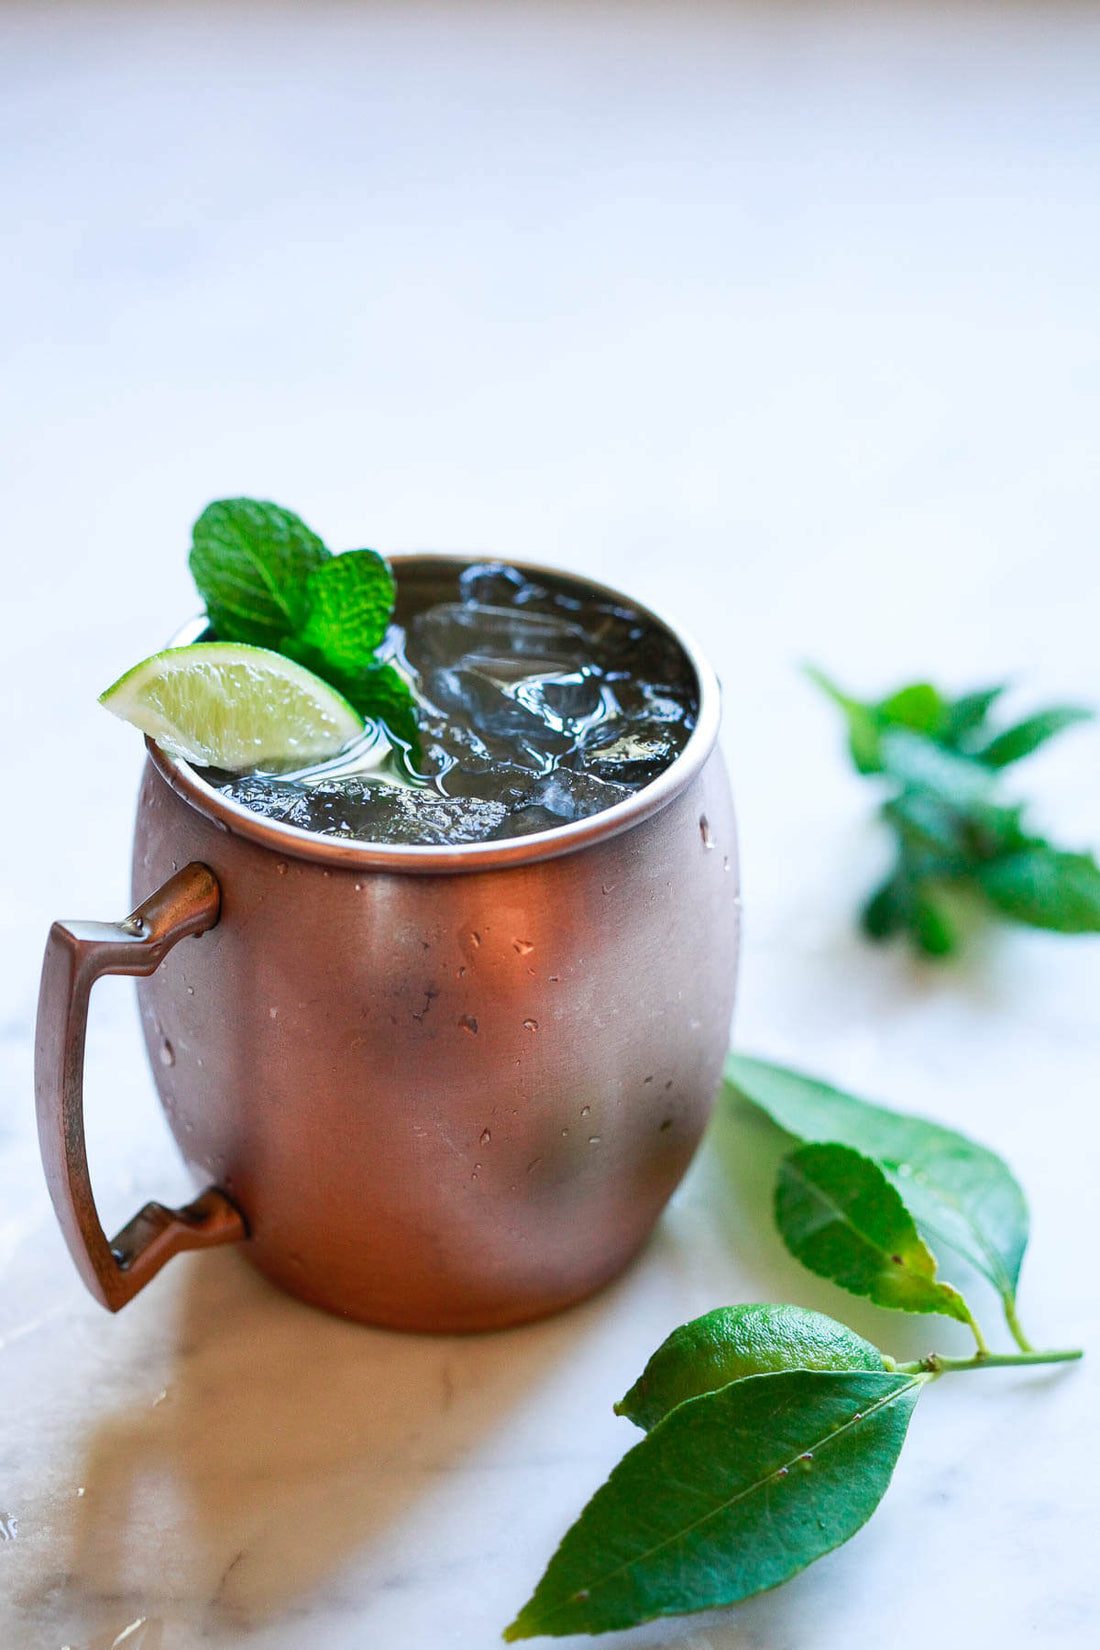 Moscow mule featured on white background with fresh mint laid around it